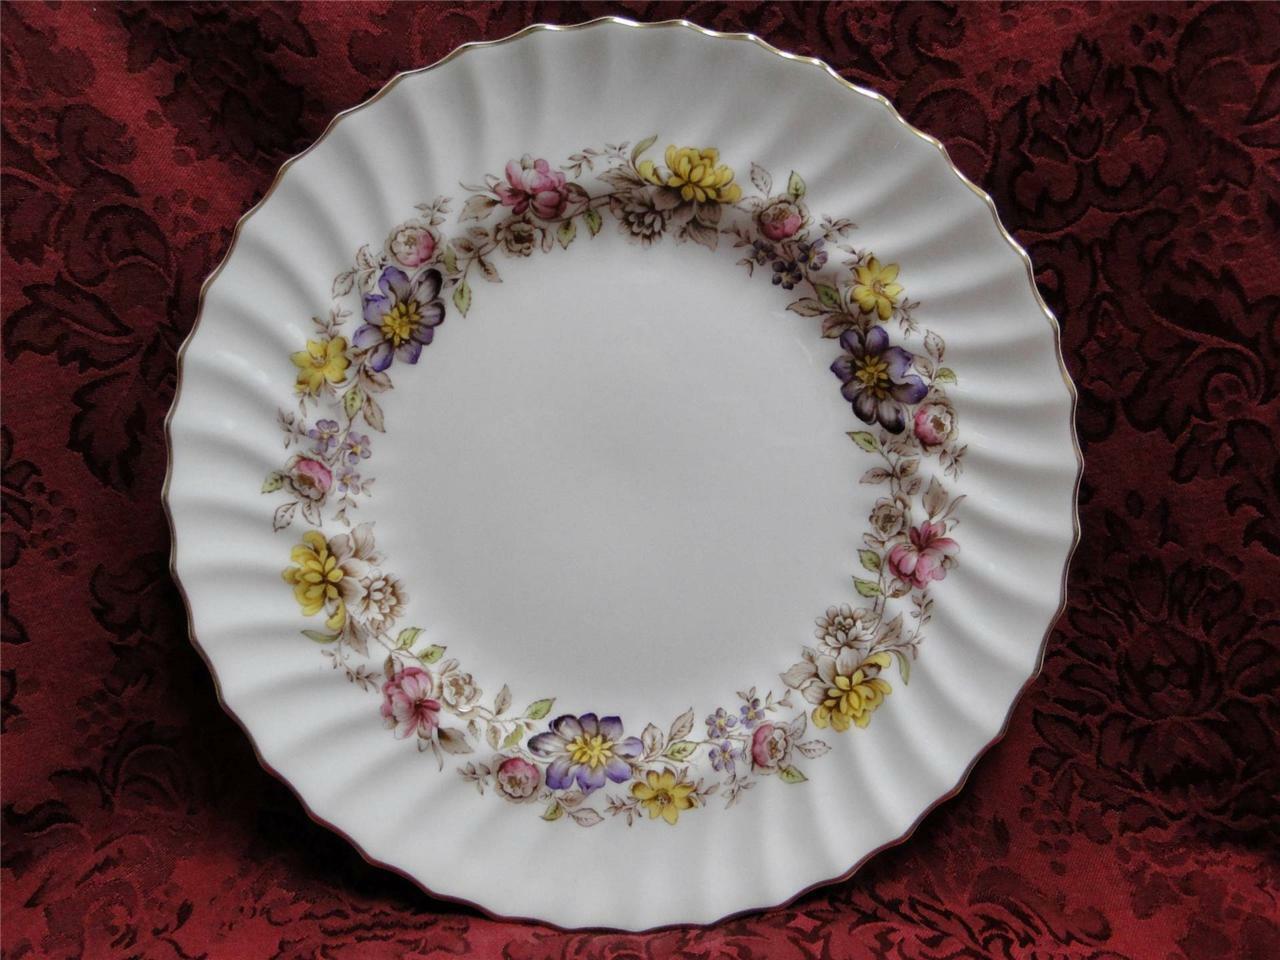 Royal Doulton Mayfair H4897, Multicolored Floral Band: Dinner Plate (s), 10 3/4"